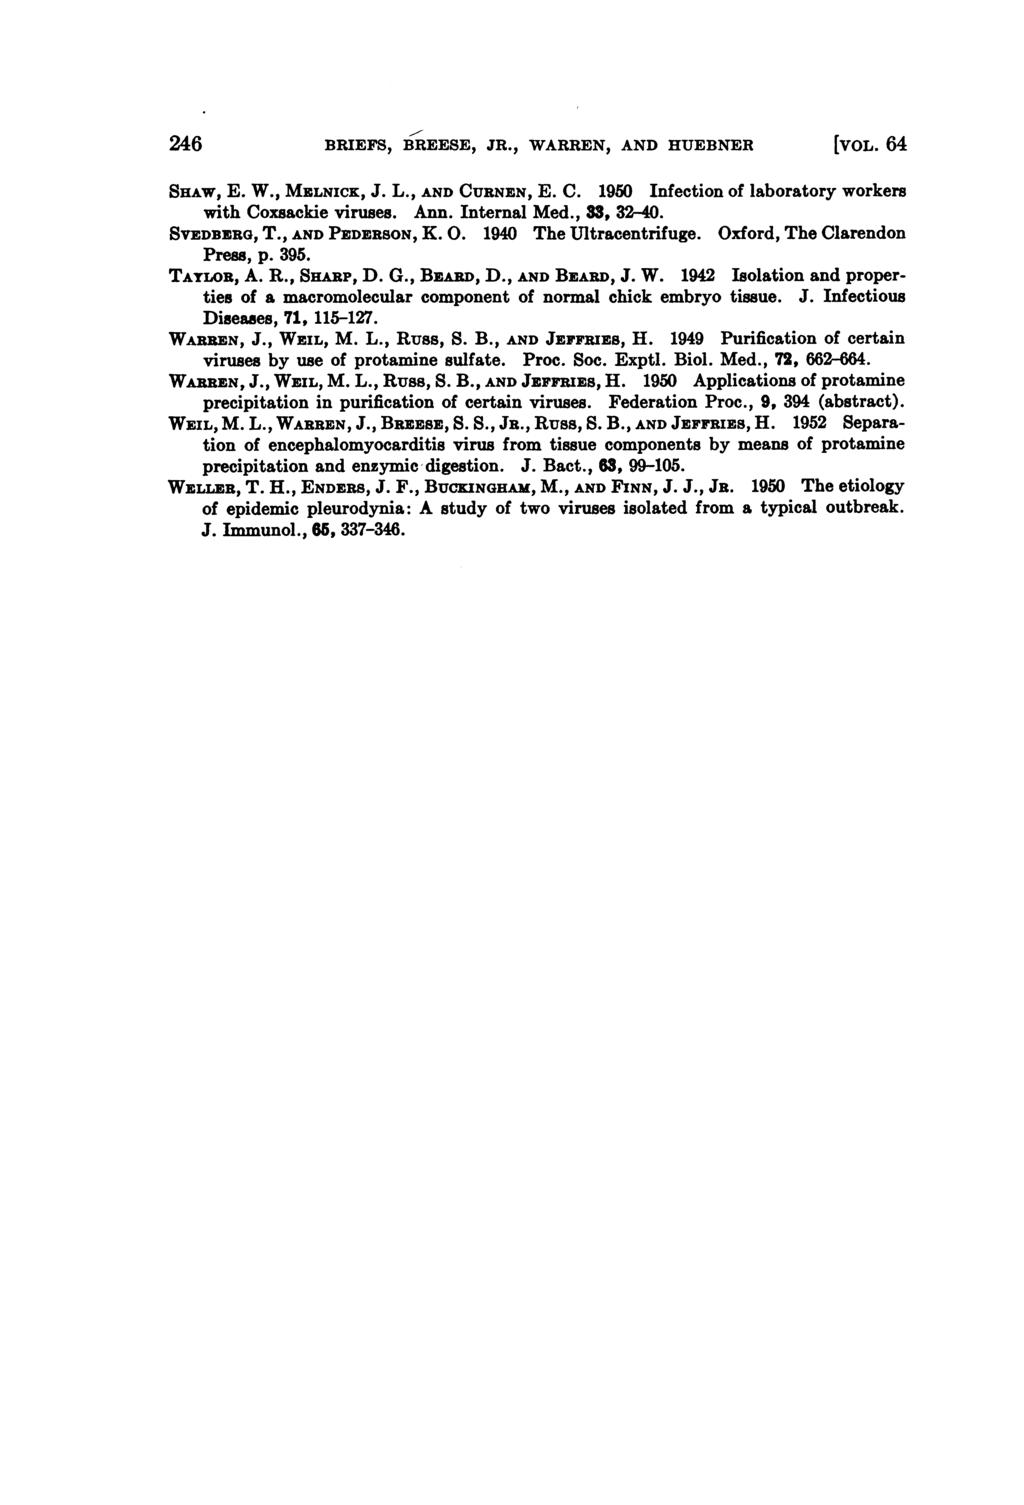 246 BRIEFS, BREESE, JR., WARREN, AND HUEBNER [VOL. 64 SHAw, E. W., MELNICK, J. L., AND CURNEN, E. C. 1950 Infection of laboratory workers with Coxsackie viruses. Ann. Internal Med., 33, 32-40.